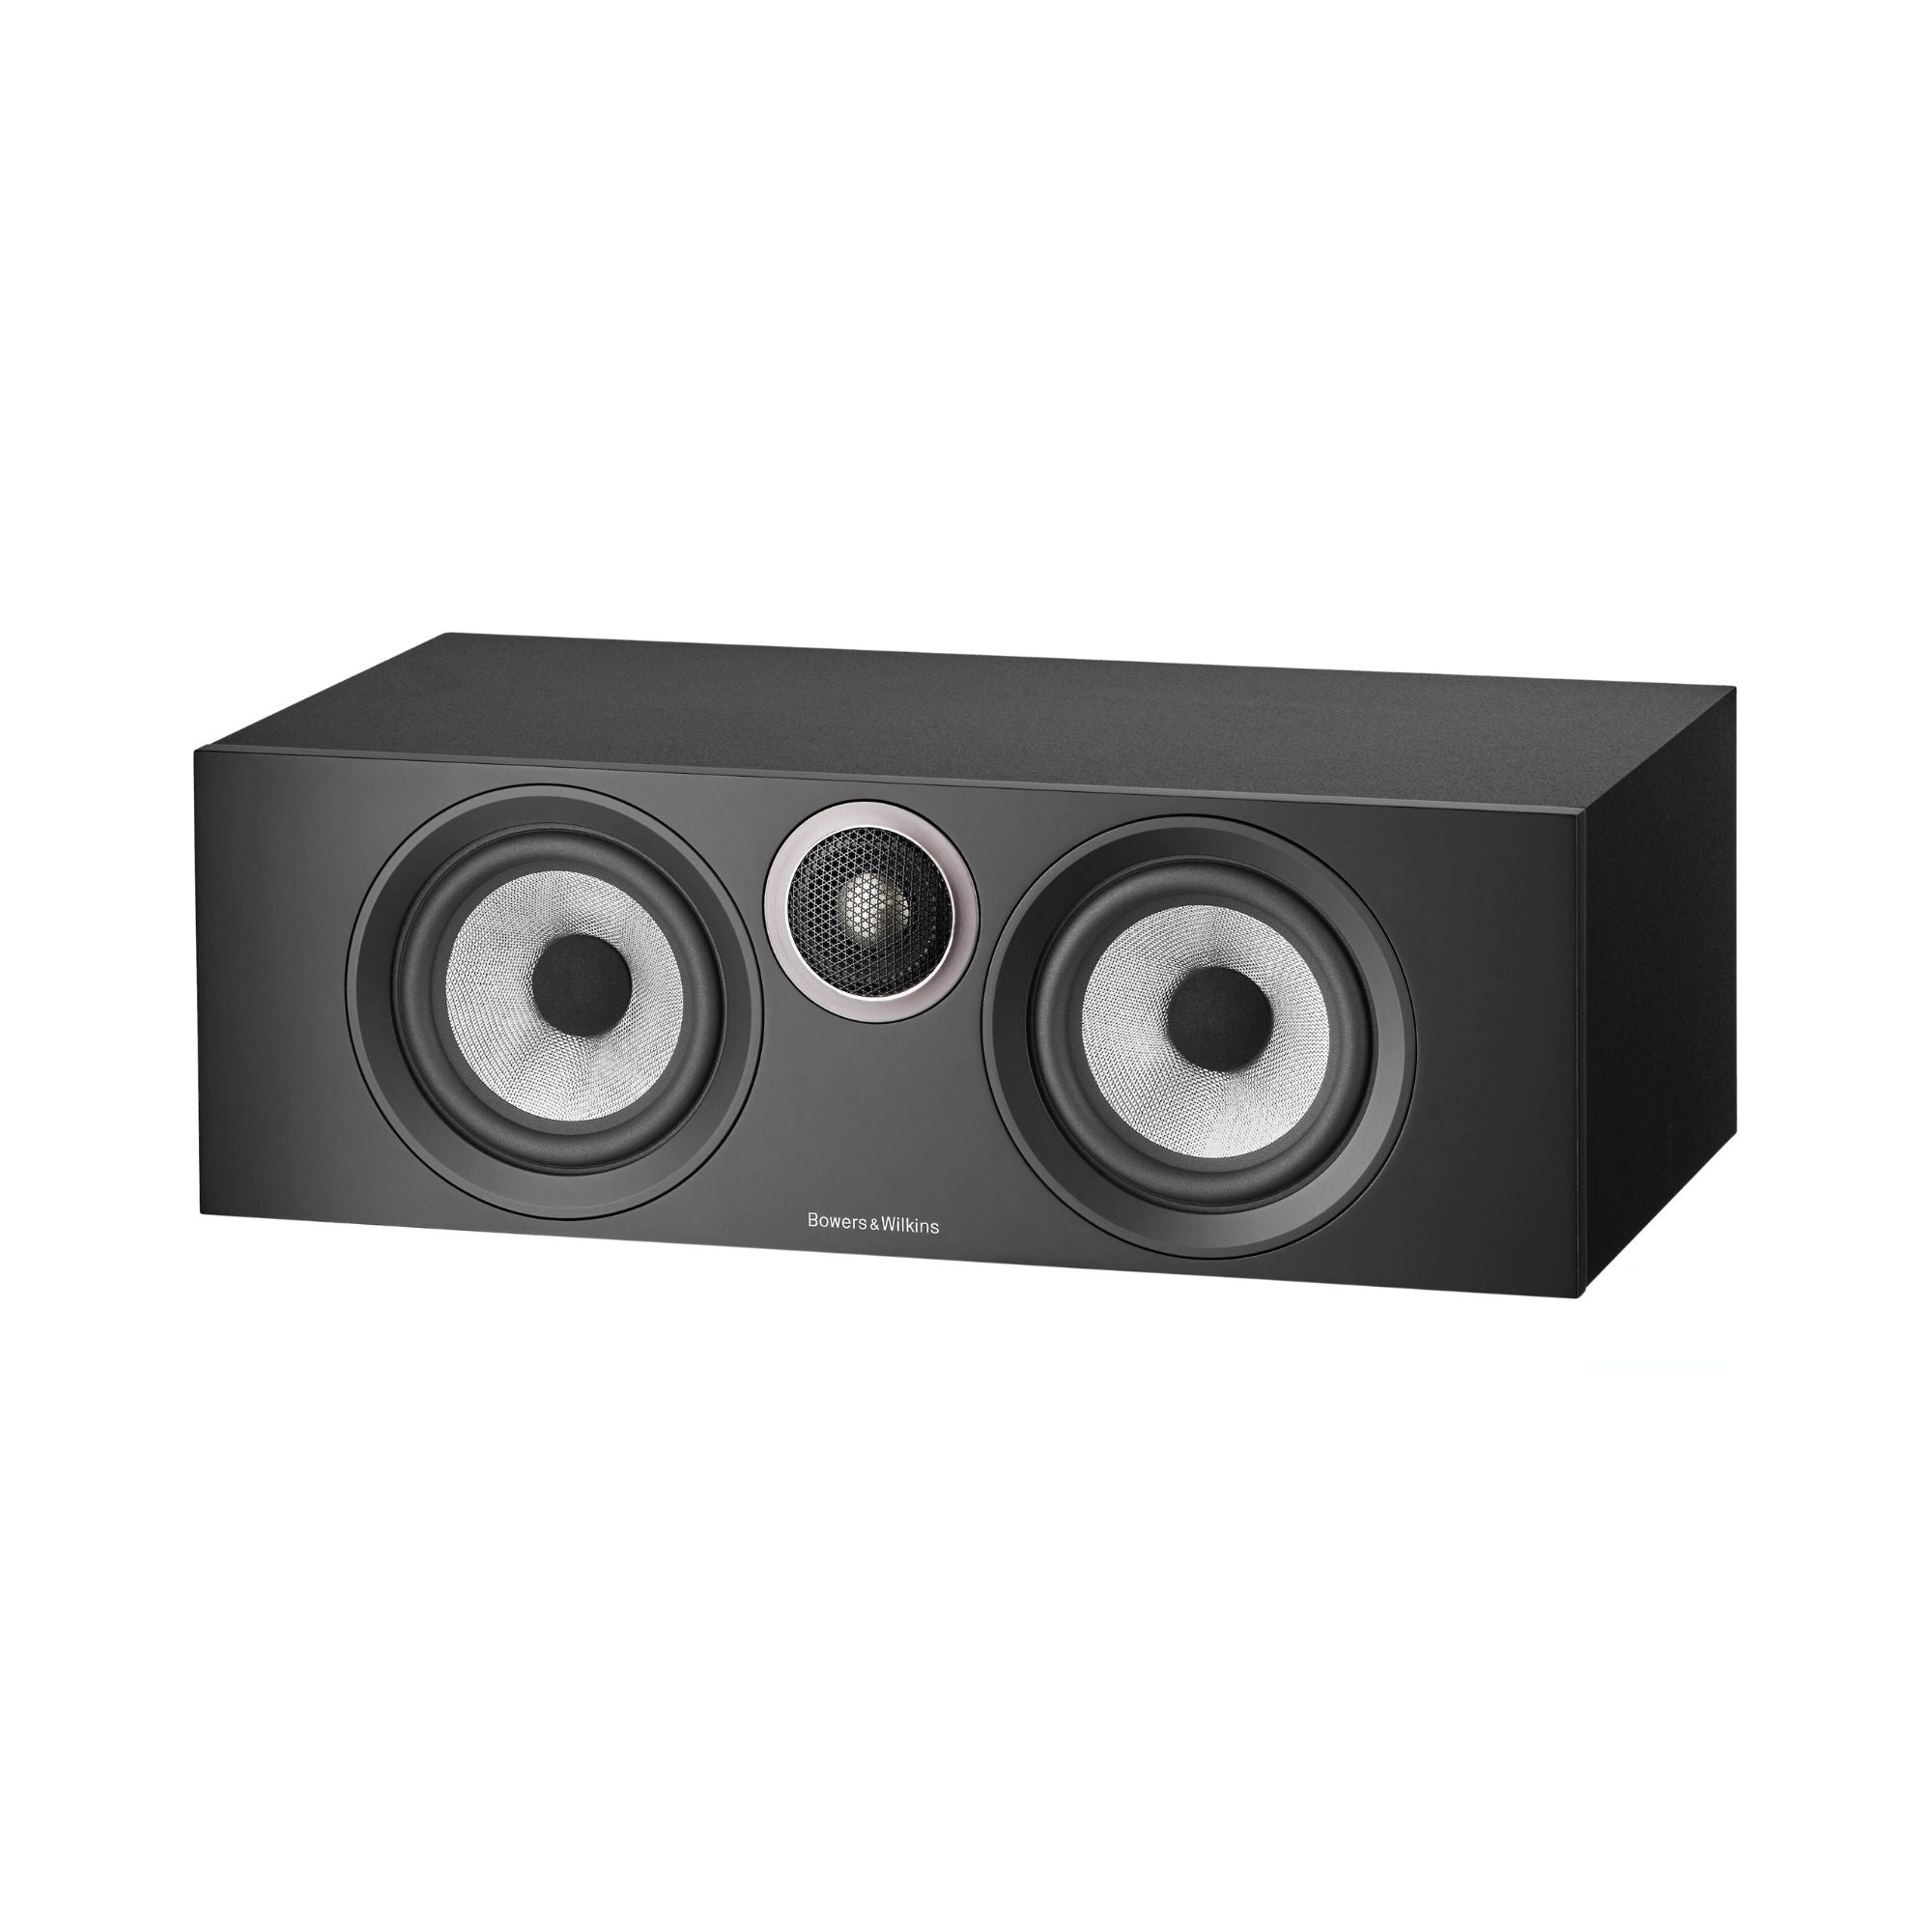 Bowers & Wilkins HTM6 S3 2-Way Center Channel Speaker, Bowers & Wilkins, Centre Channel Speaker - AVStore.in